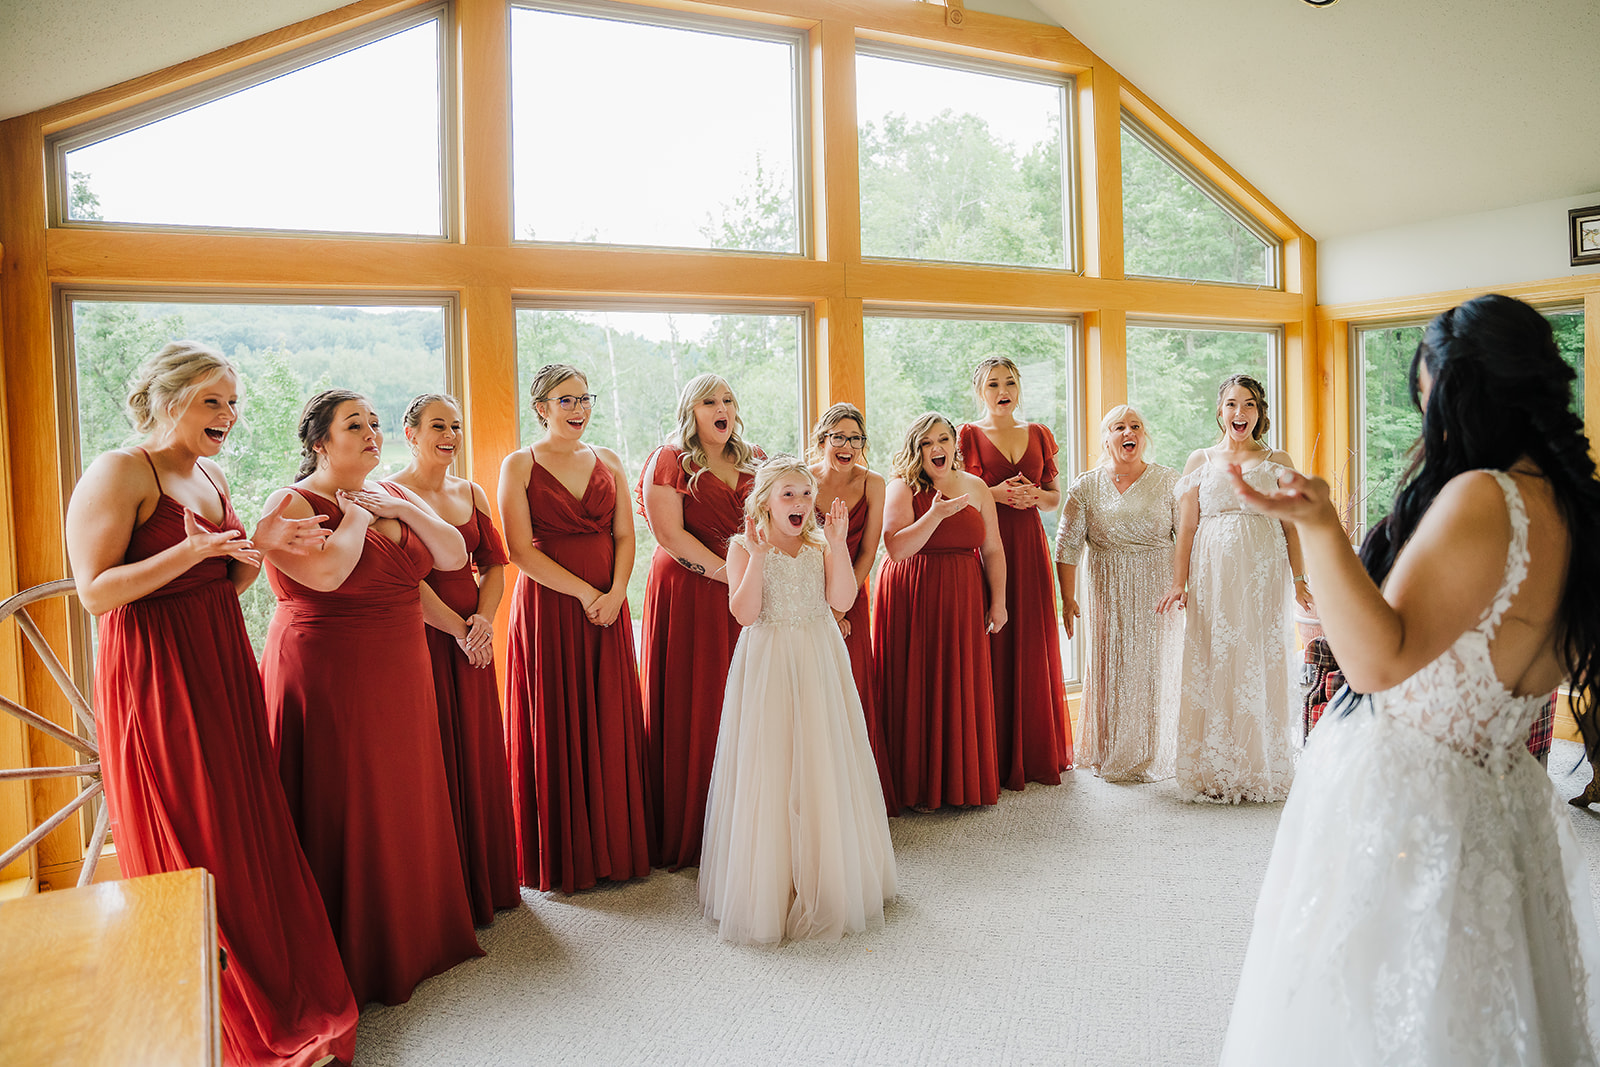 The flower girl and bridesmaids are so excited to see this beautiful Wisconsin bride’s dress reveal. First look Bridal party photos Getting ready photos Chippewa valley bride #dixonappleorchard #orchardweddingvenue #outdoorwedding #appleorchardwedding #wisconsinweddingvenue
